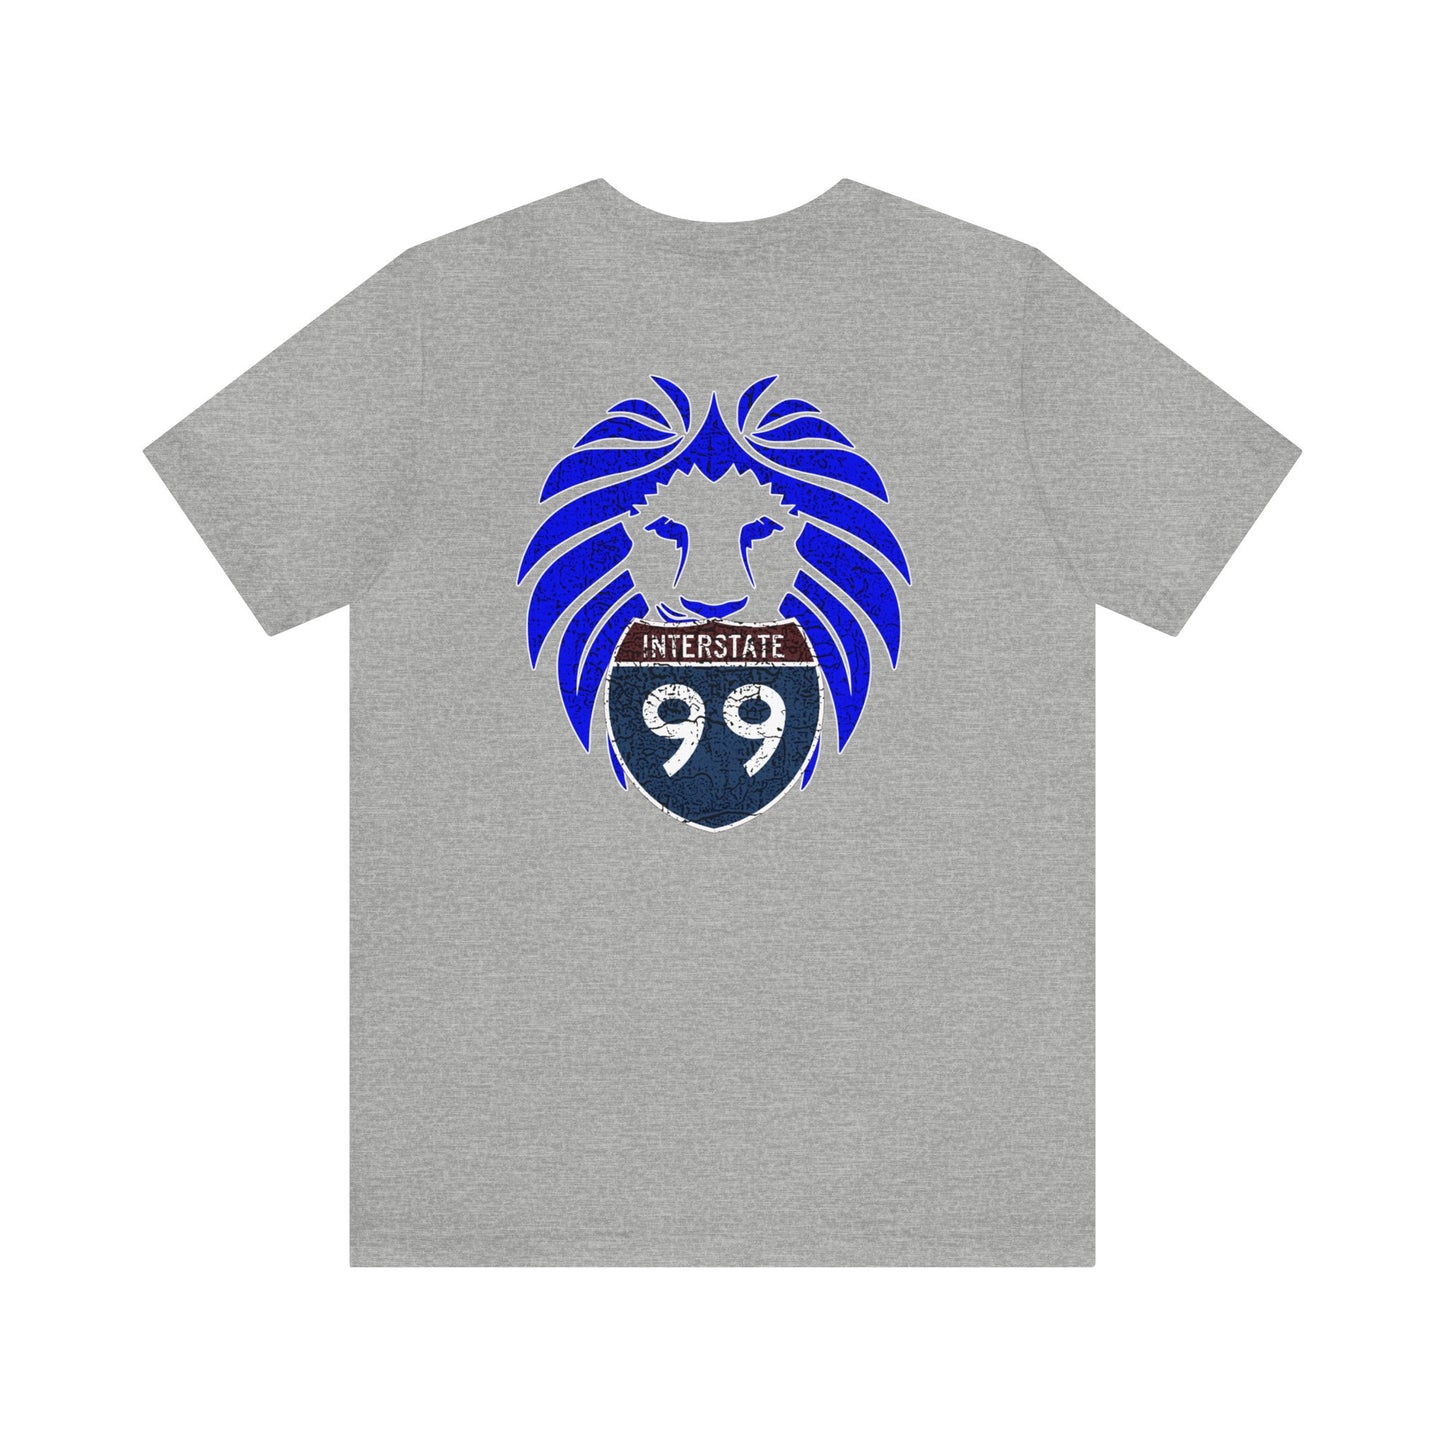 I-99, STATE COLLEGE, PA,  Unisex Jersey Short Sleeve Tee